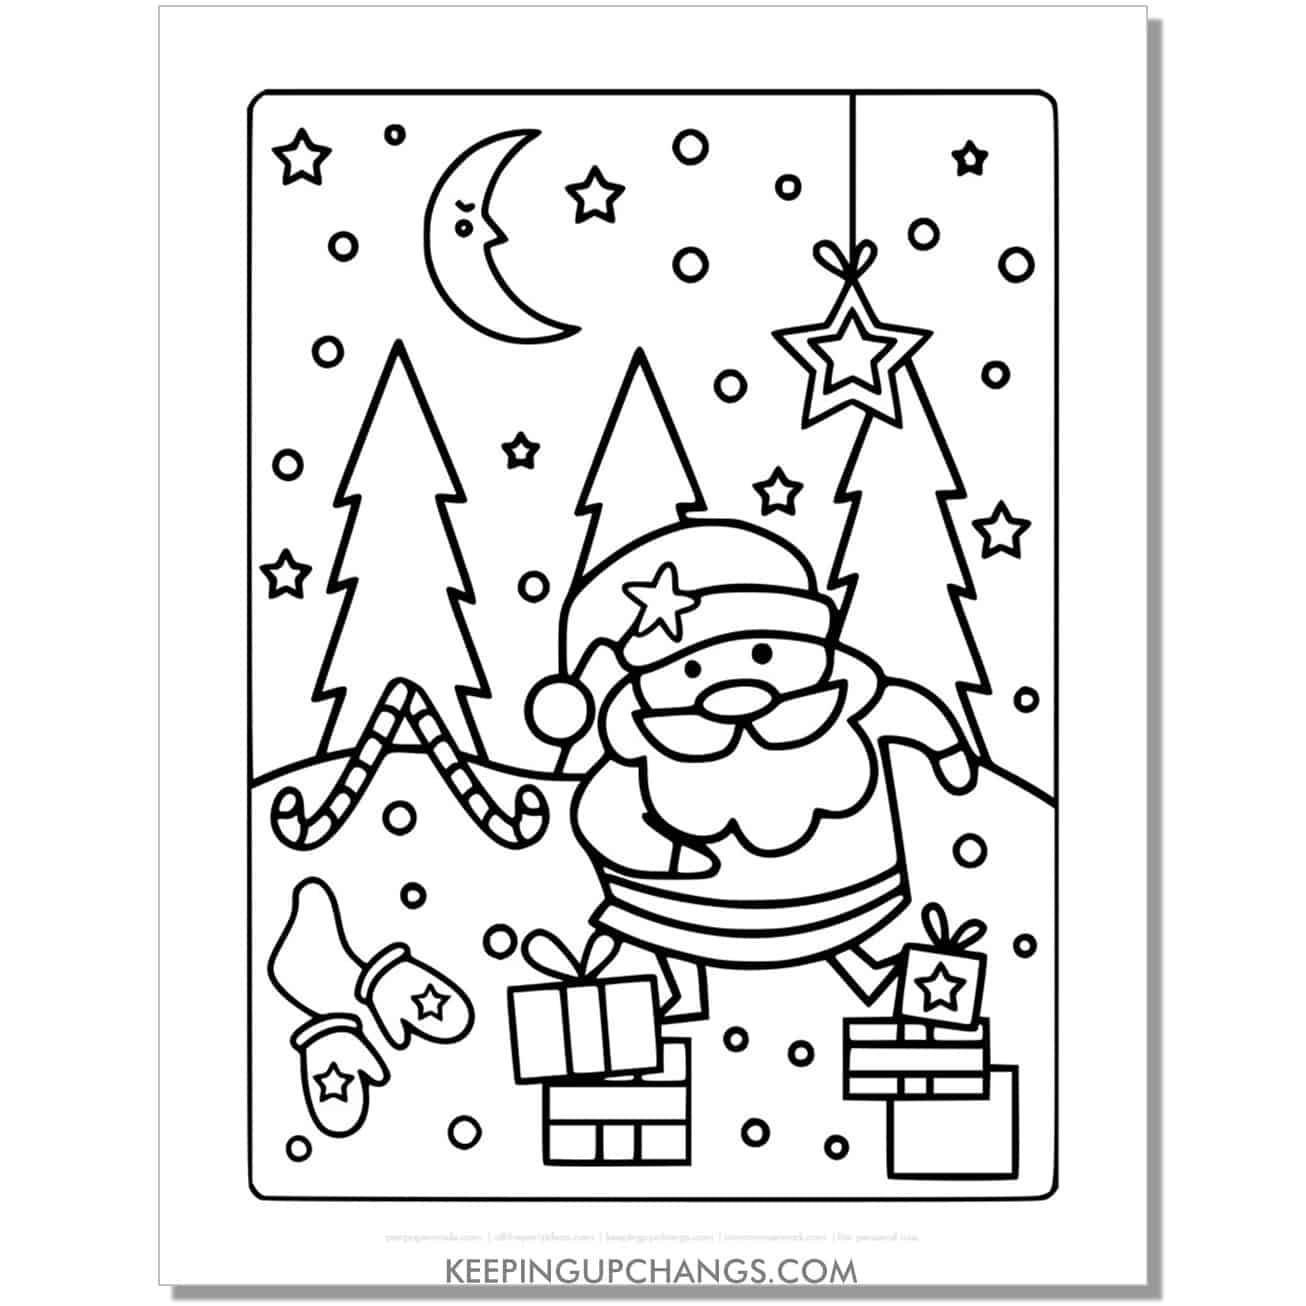 free fun, detailed santa with gifts, trees coloring page.